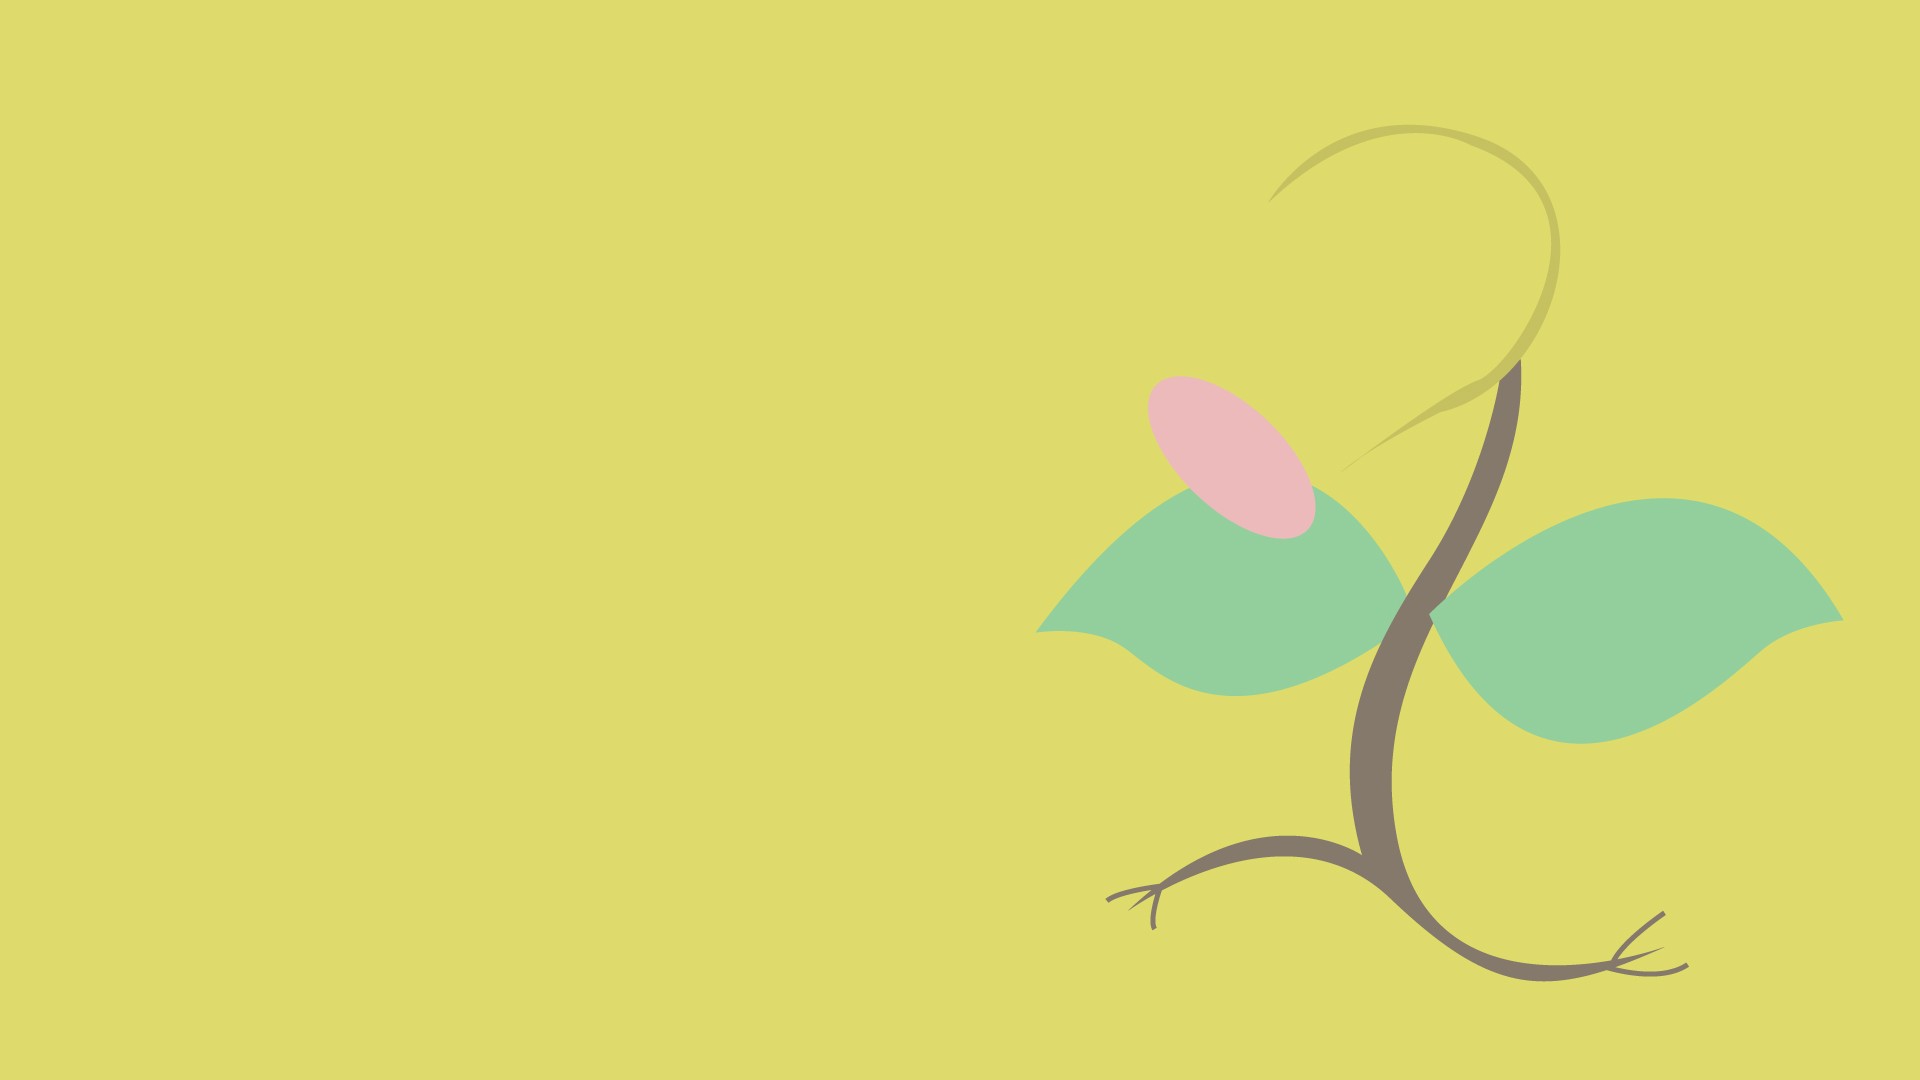 A plant with a pink flower and green leaves on a yellow background - Pokemon